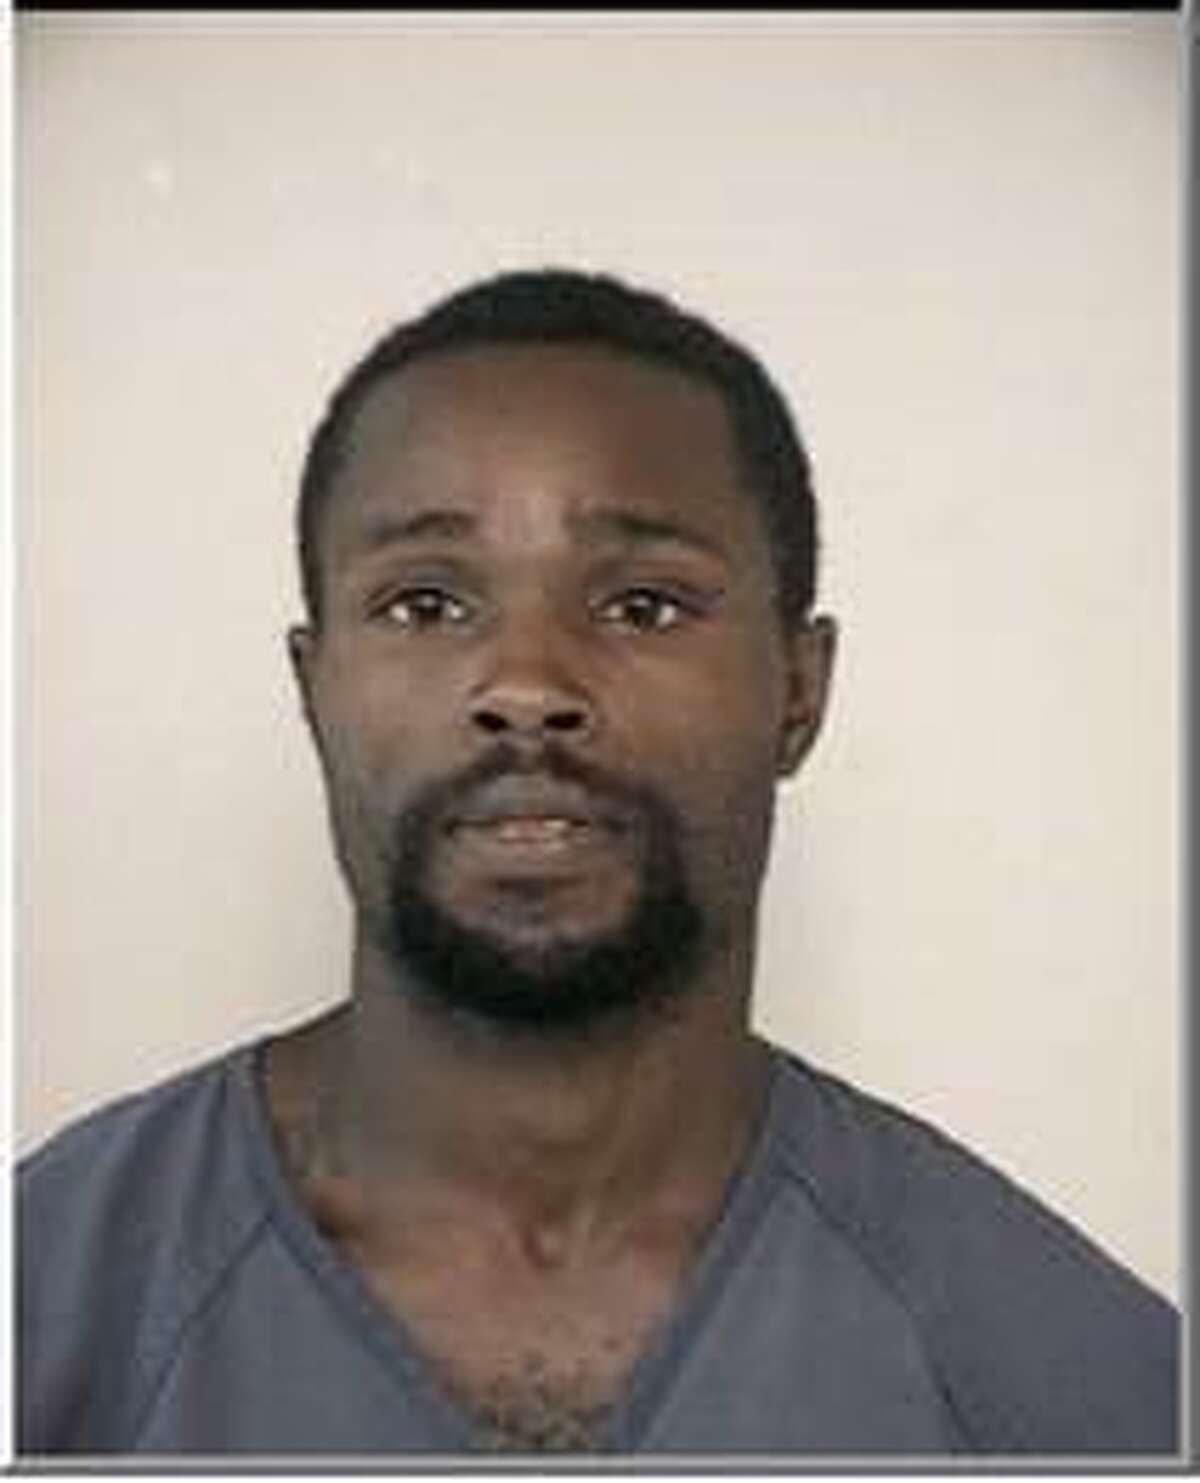 Andrew Alexander Anderson, 34, has been charged with aggravated robbery and has a $100,000 bond for a robbery at a Cricket Wireless store in the Houston area of Fort Bend County.